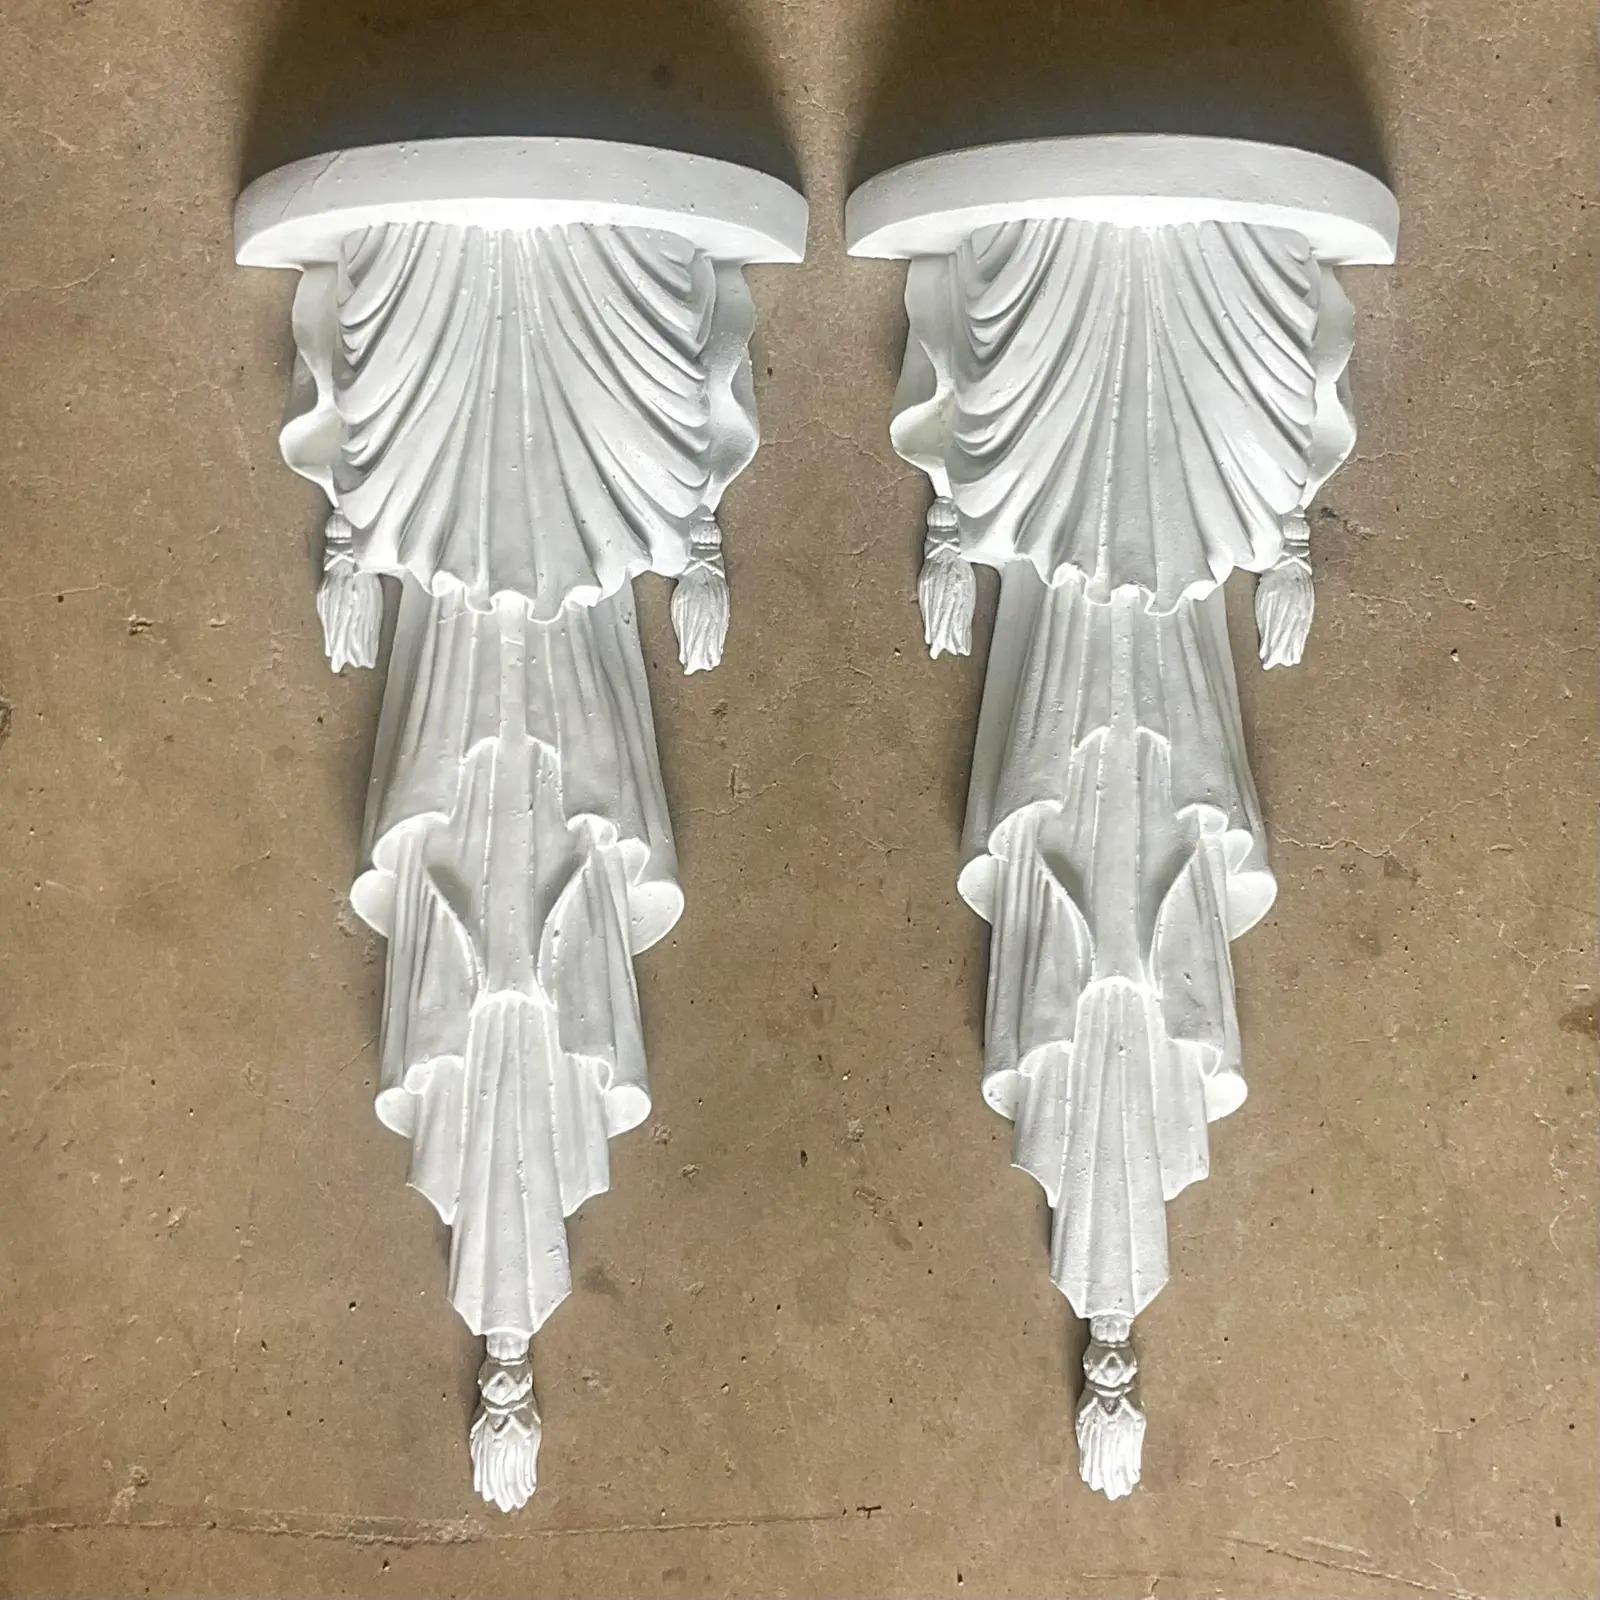 A fabulous pair of vintage Regency wall brackets. Beautiful swag design with a bright white finish. Acquired from a Palm Beach estate.